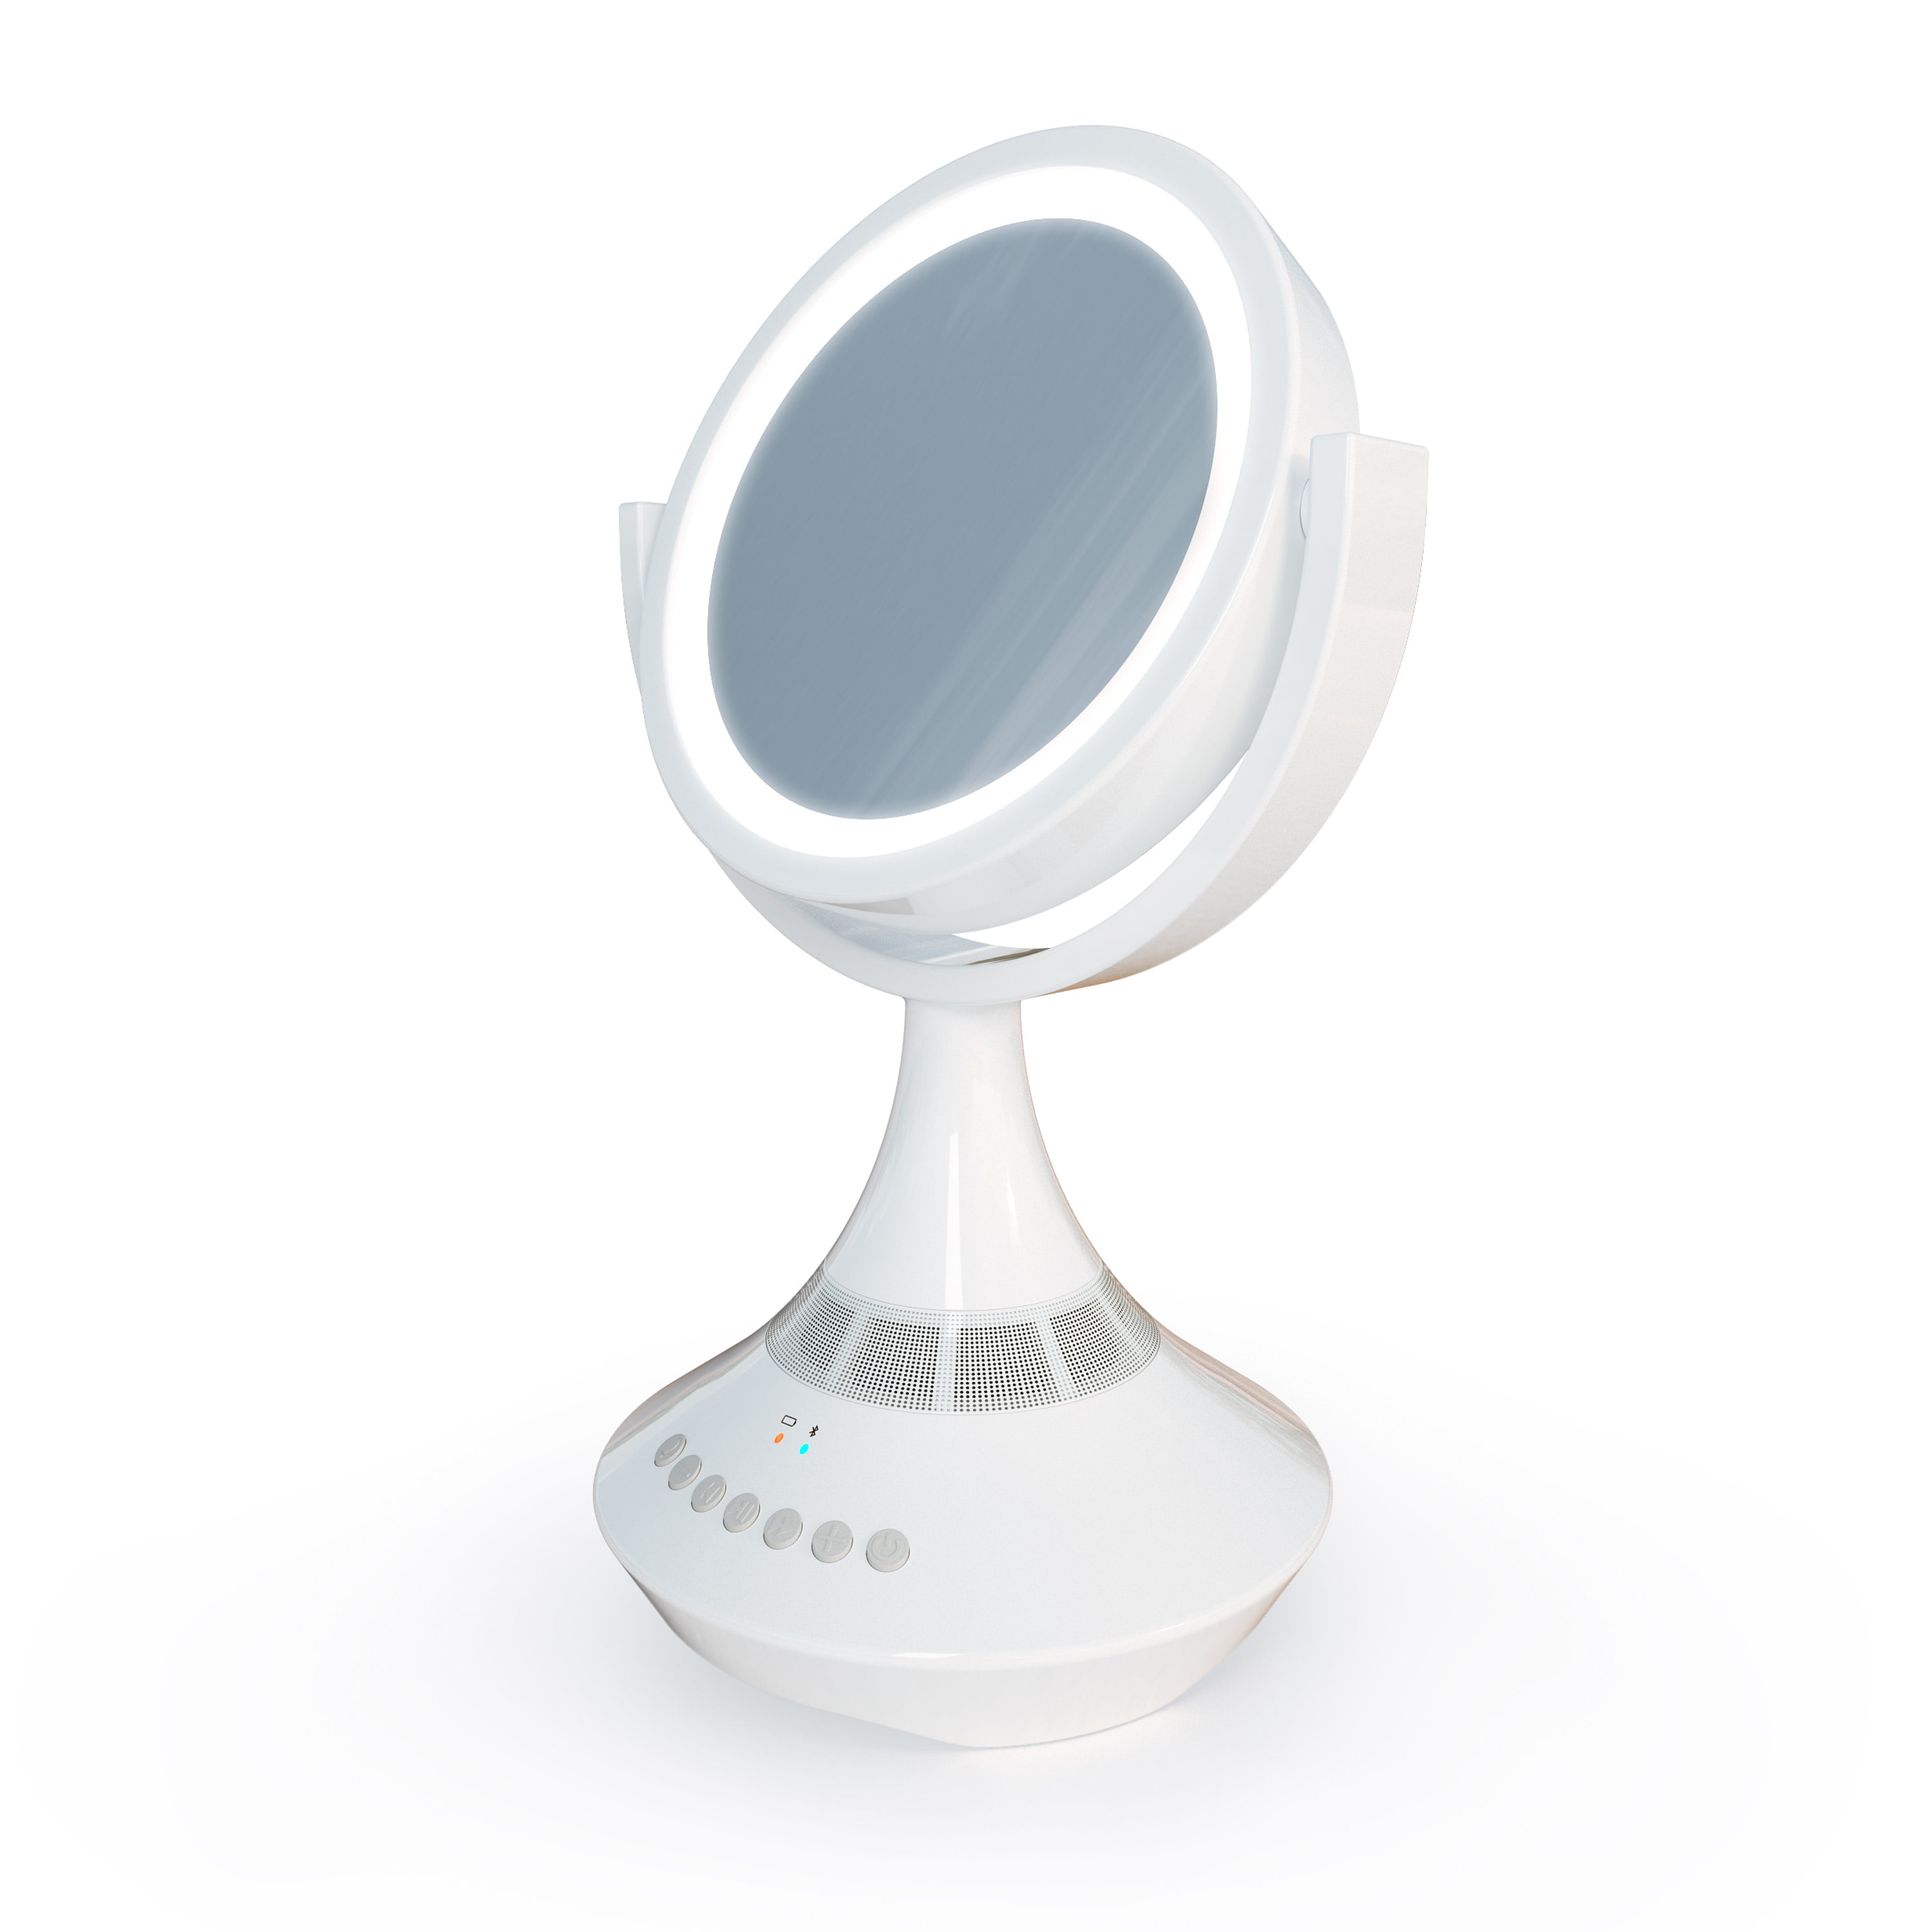 Atomi Bluetooth Double Sided Vanity, Small Cream Vanity Mirror With Lights And Bluetooth